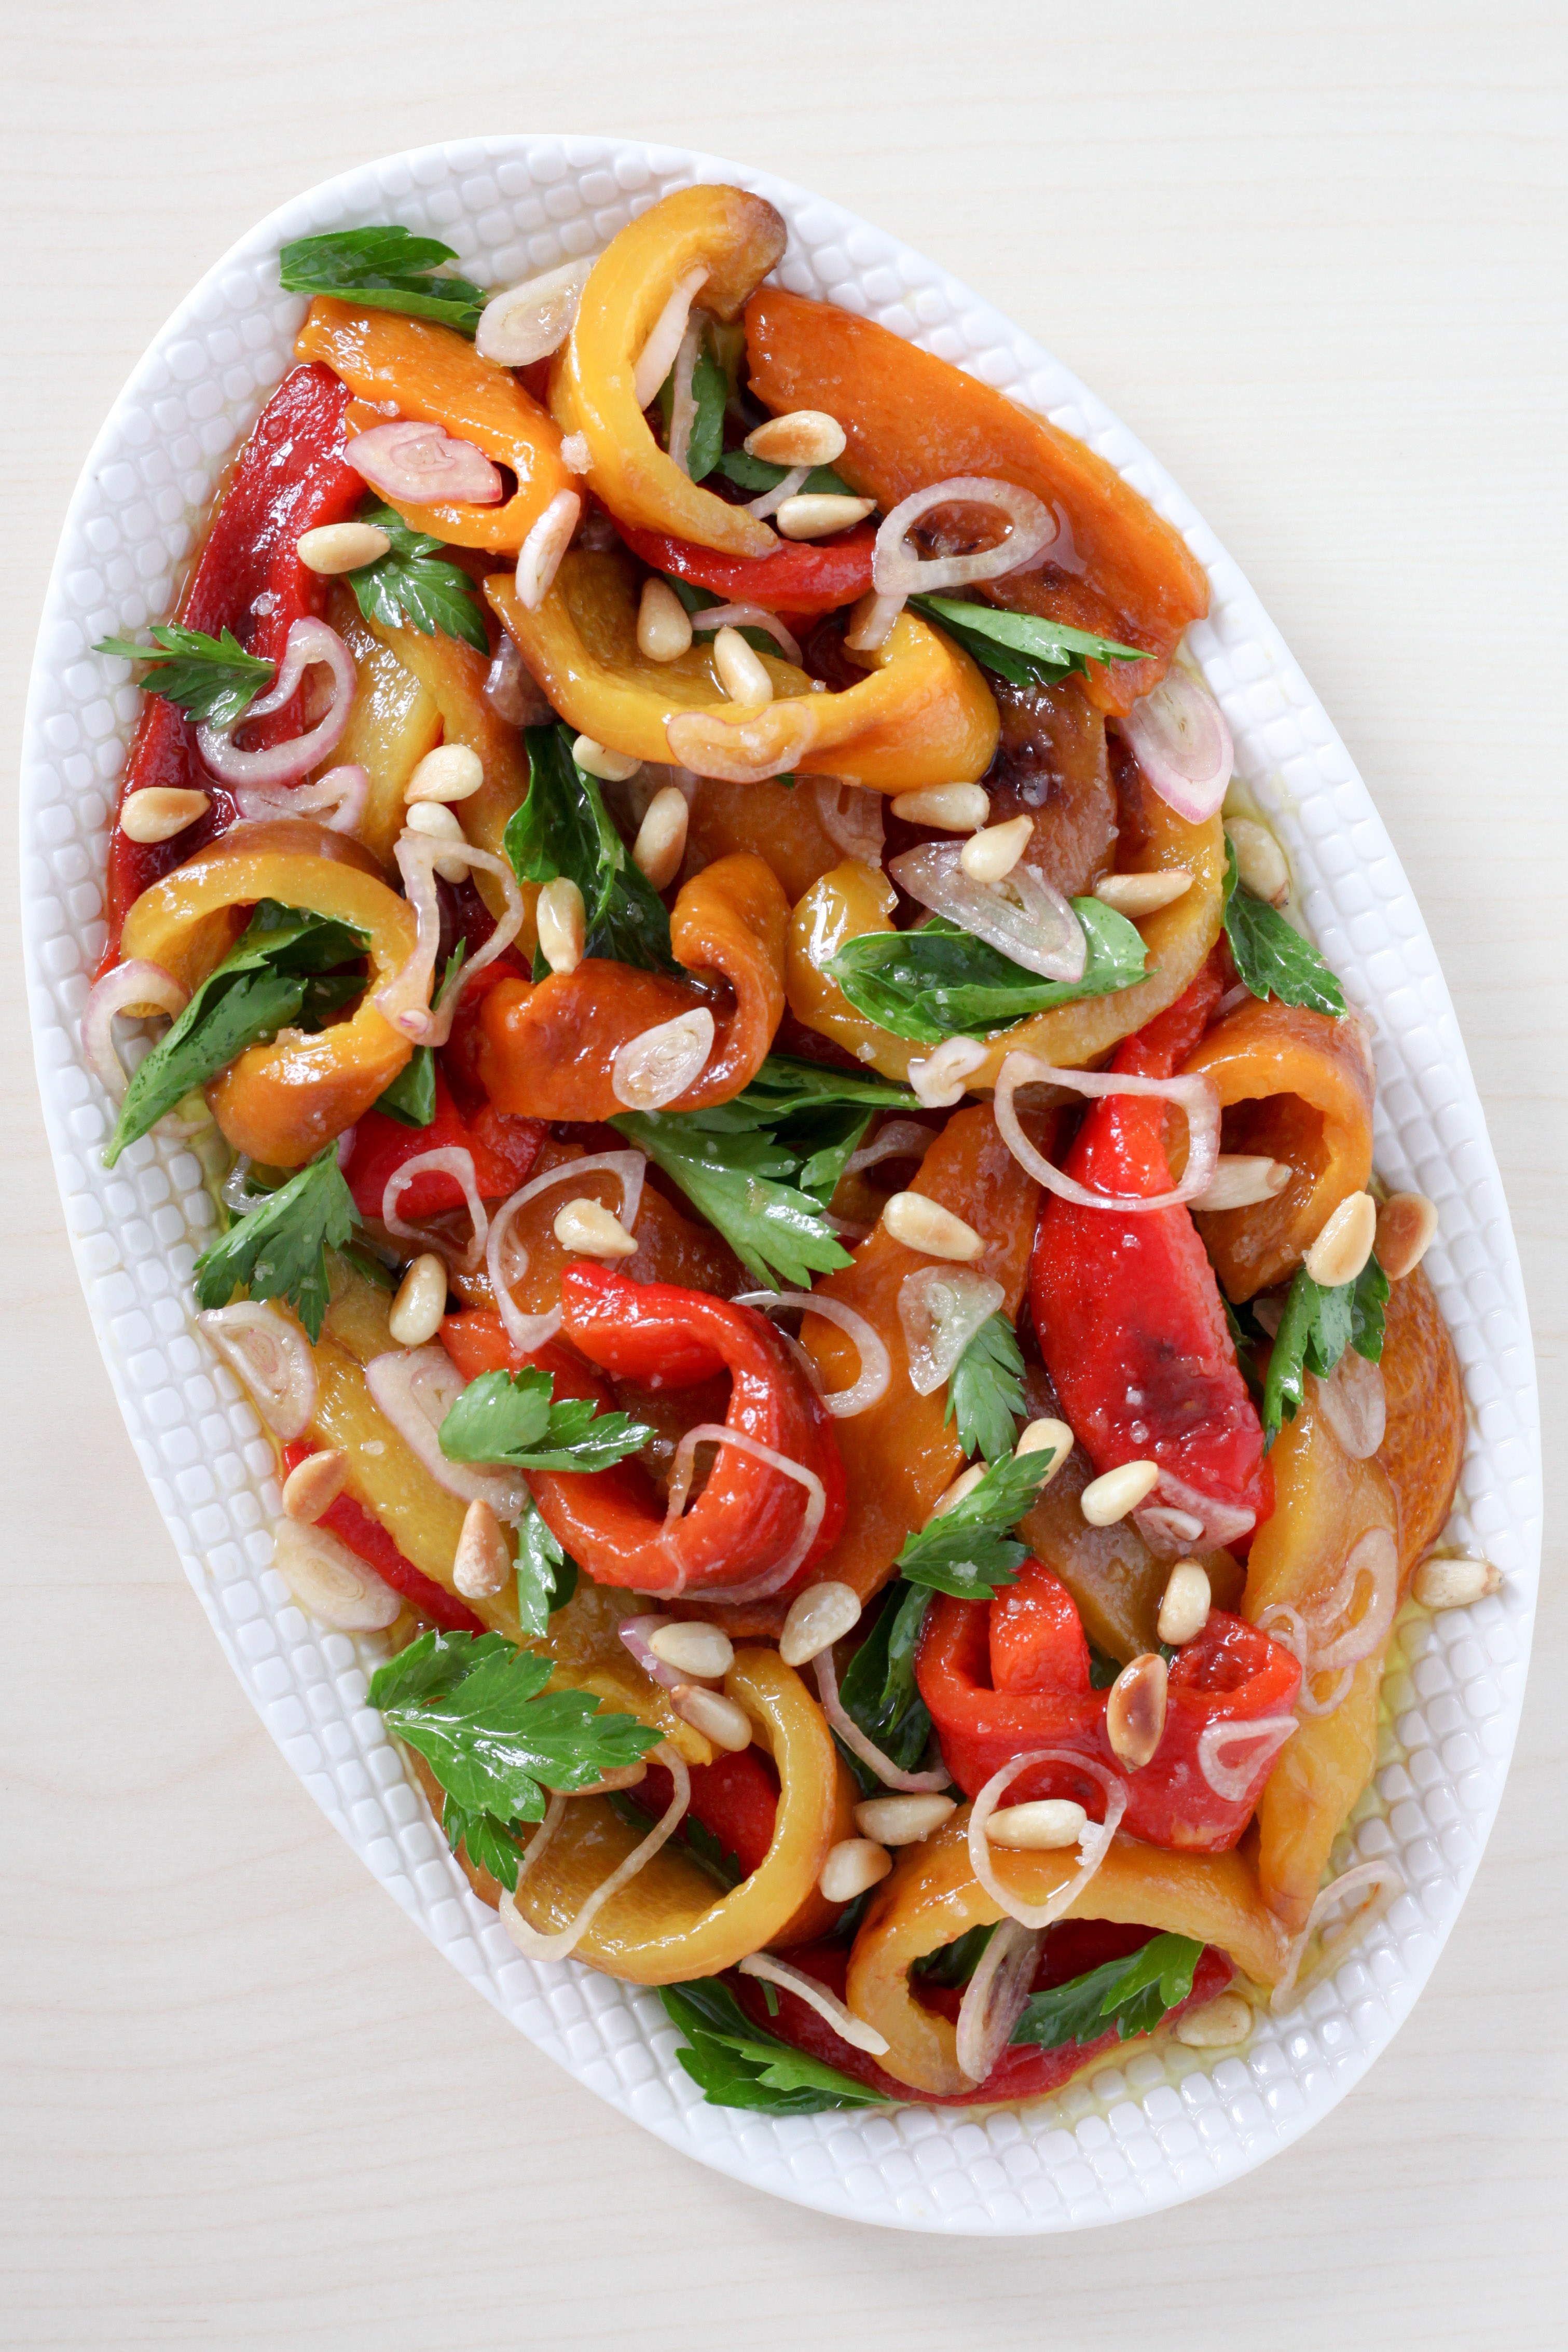 Marinated Bell Peppers With Pine Nuts and Herbs | amodestfeast.com | @amodestfeast